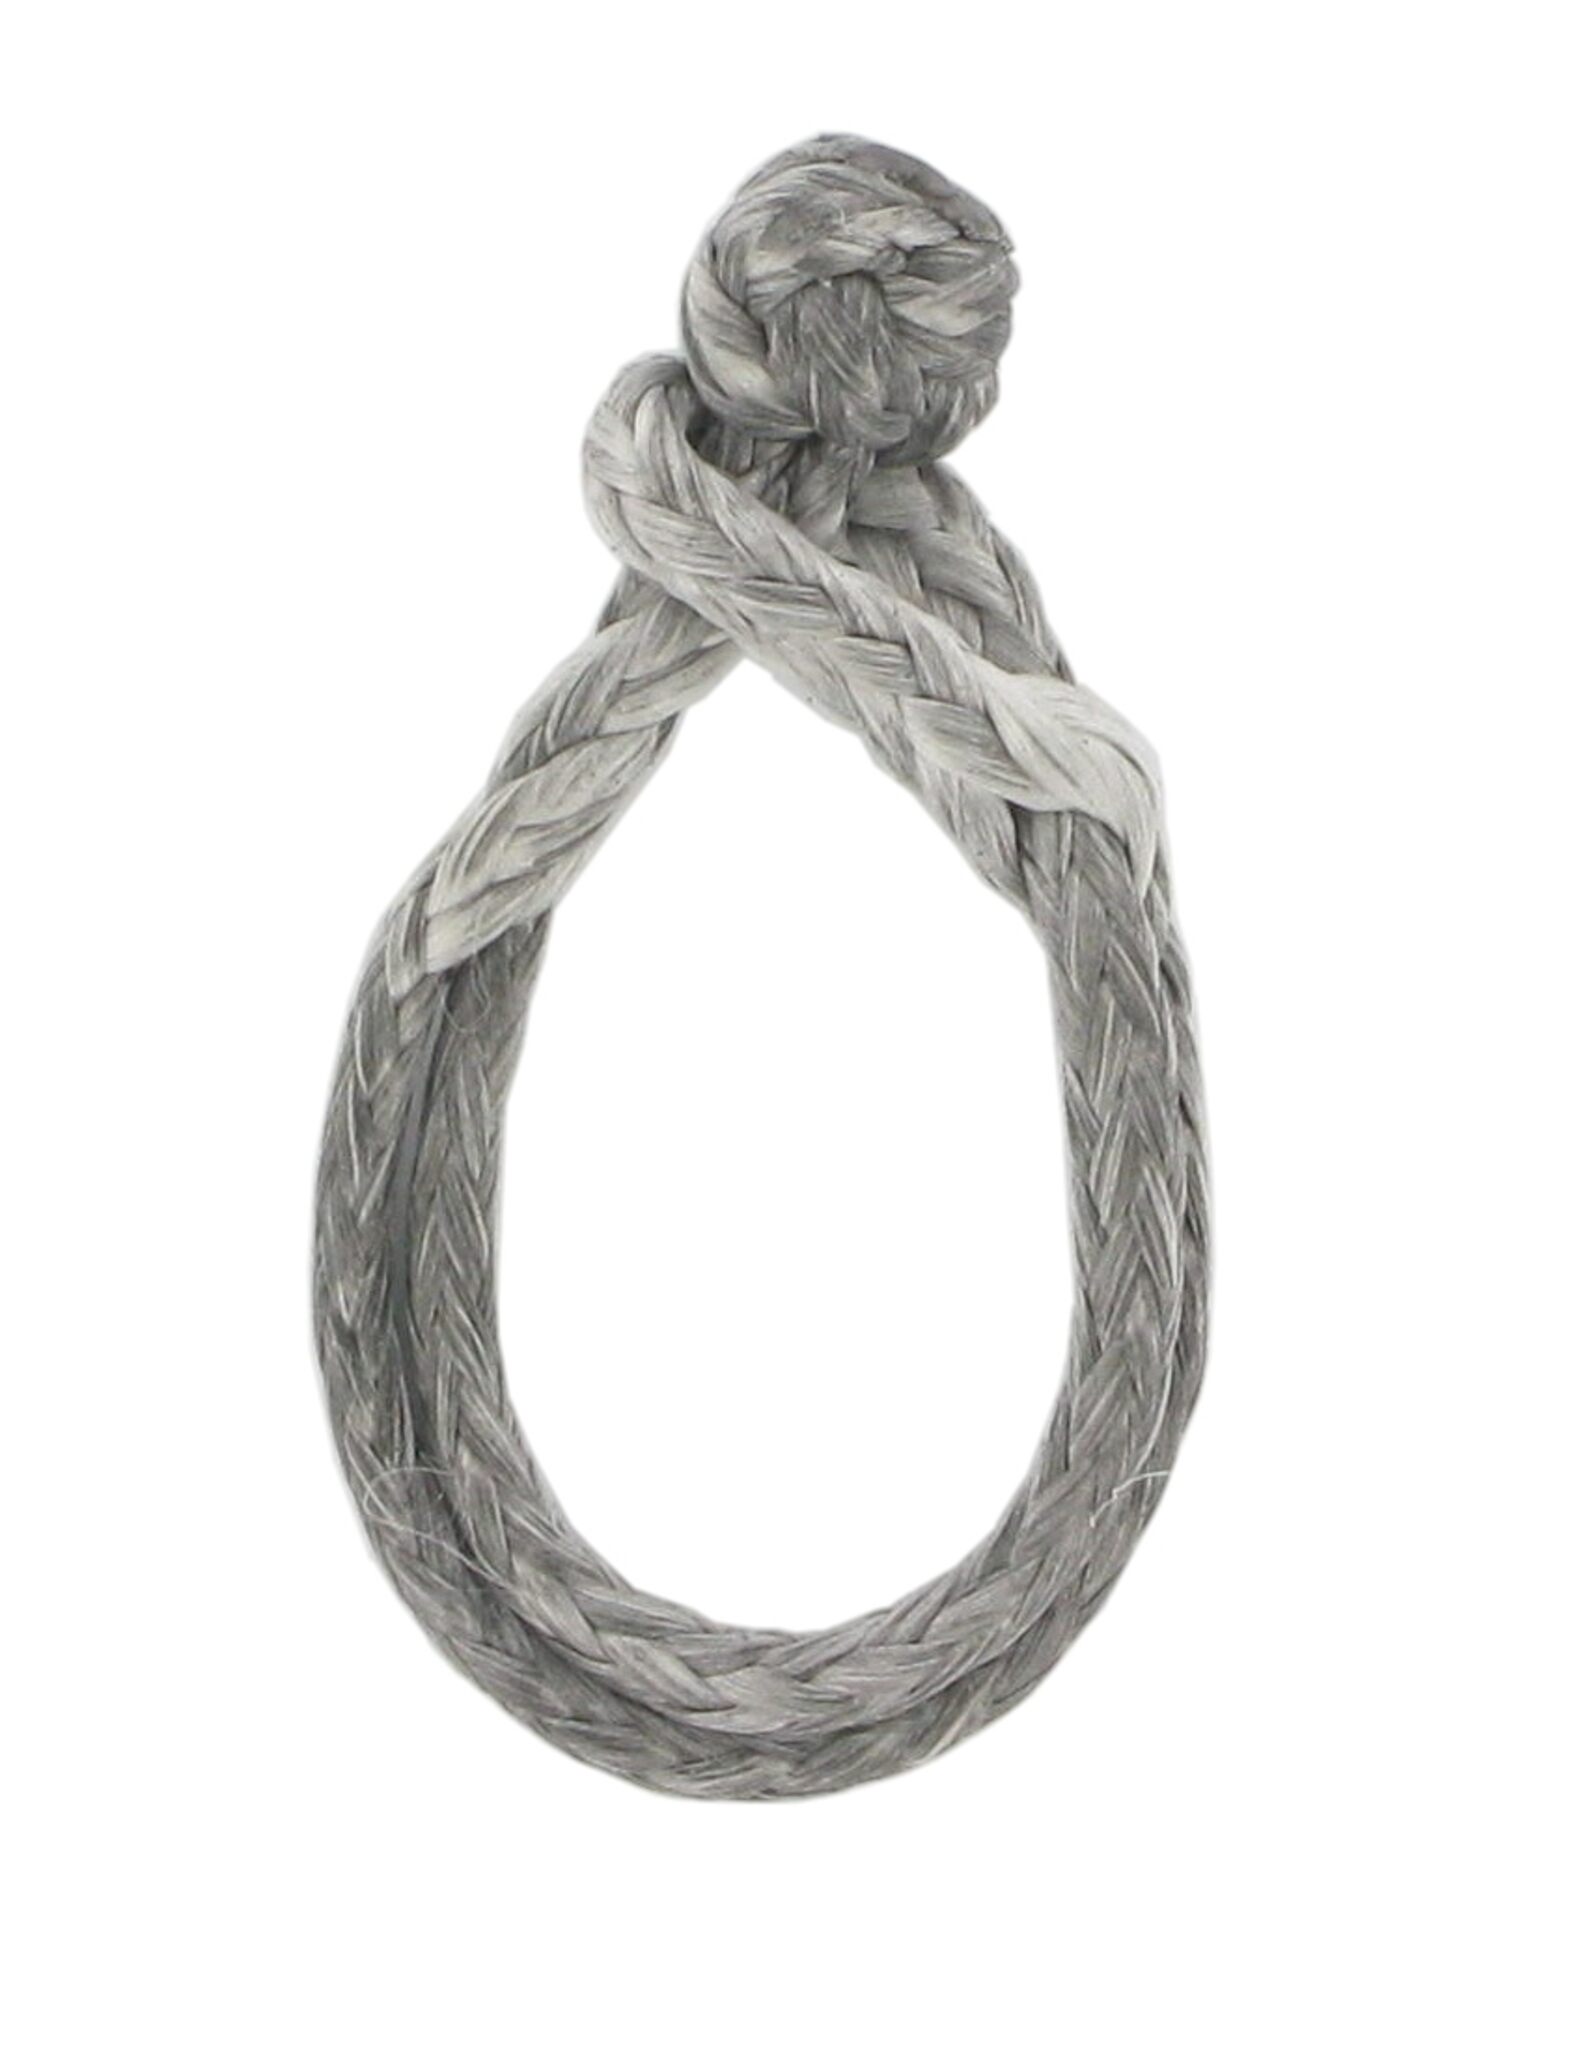 awn rope shackle